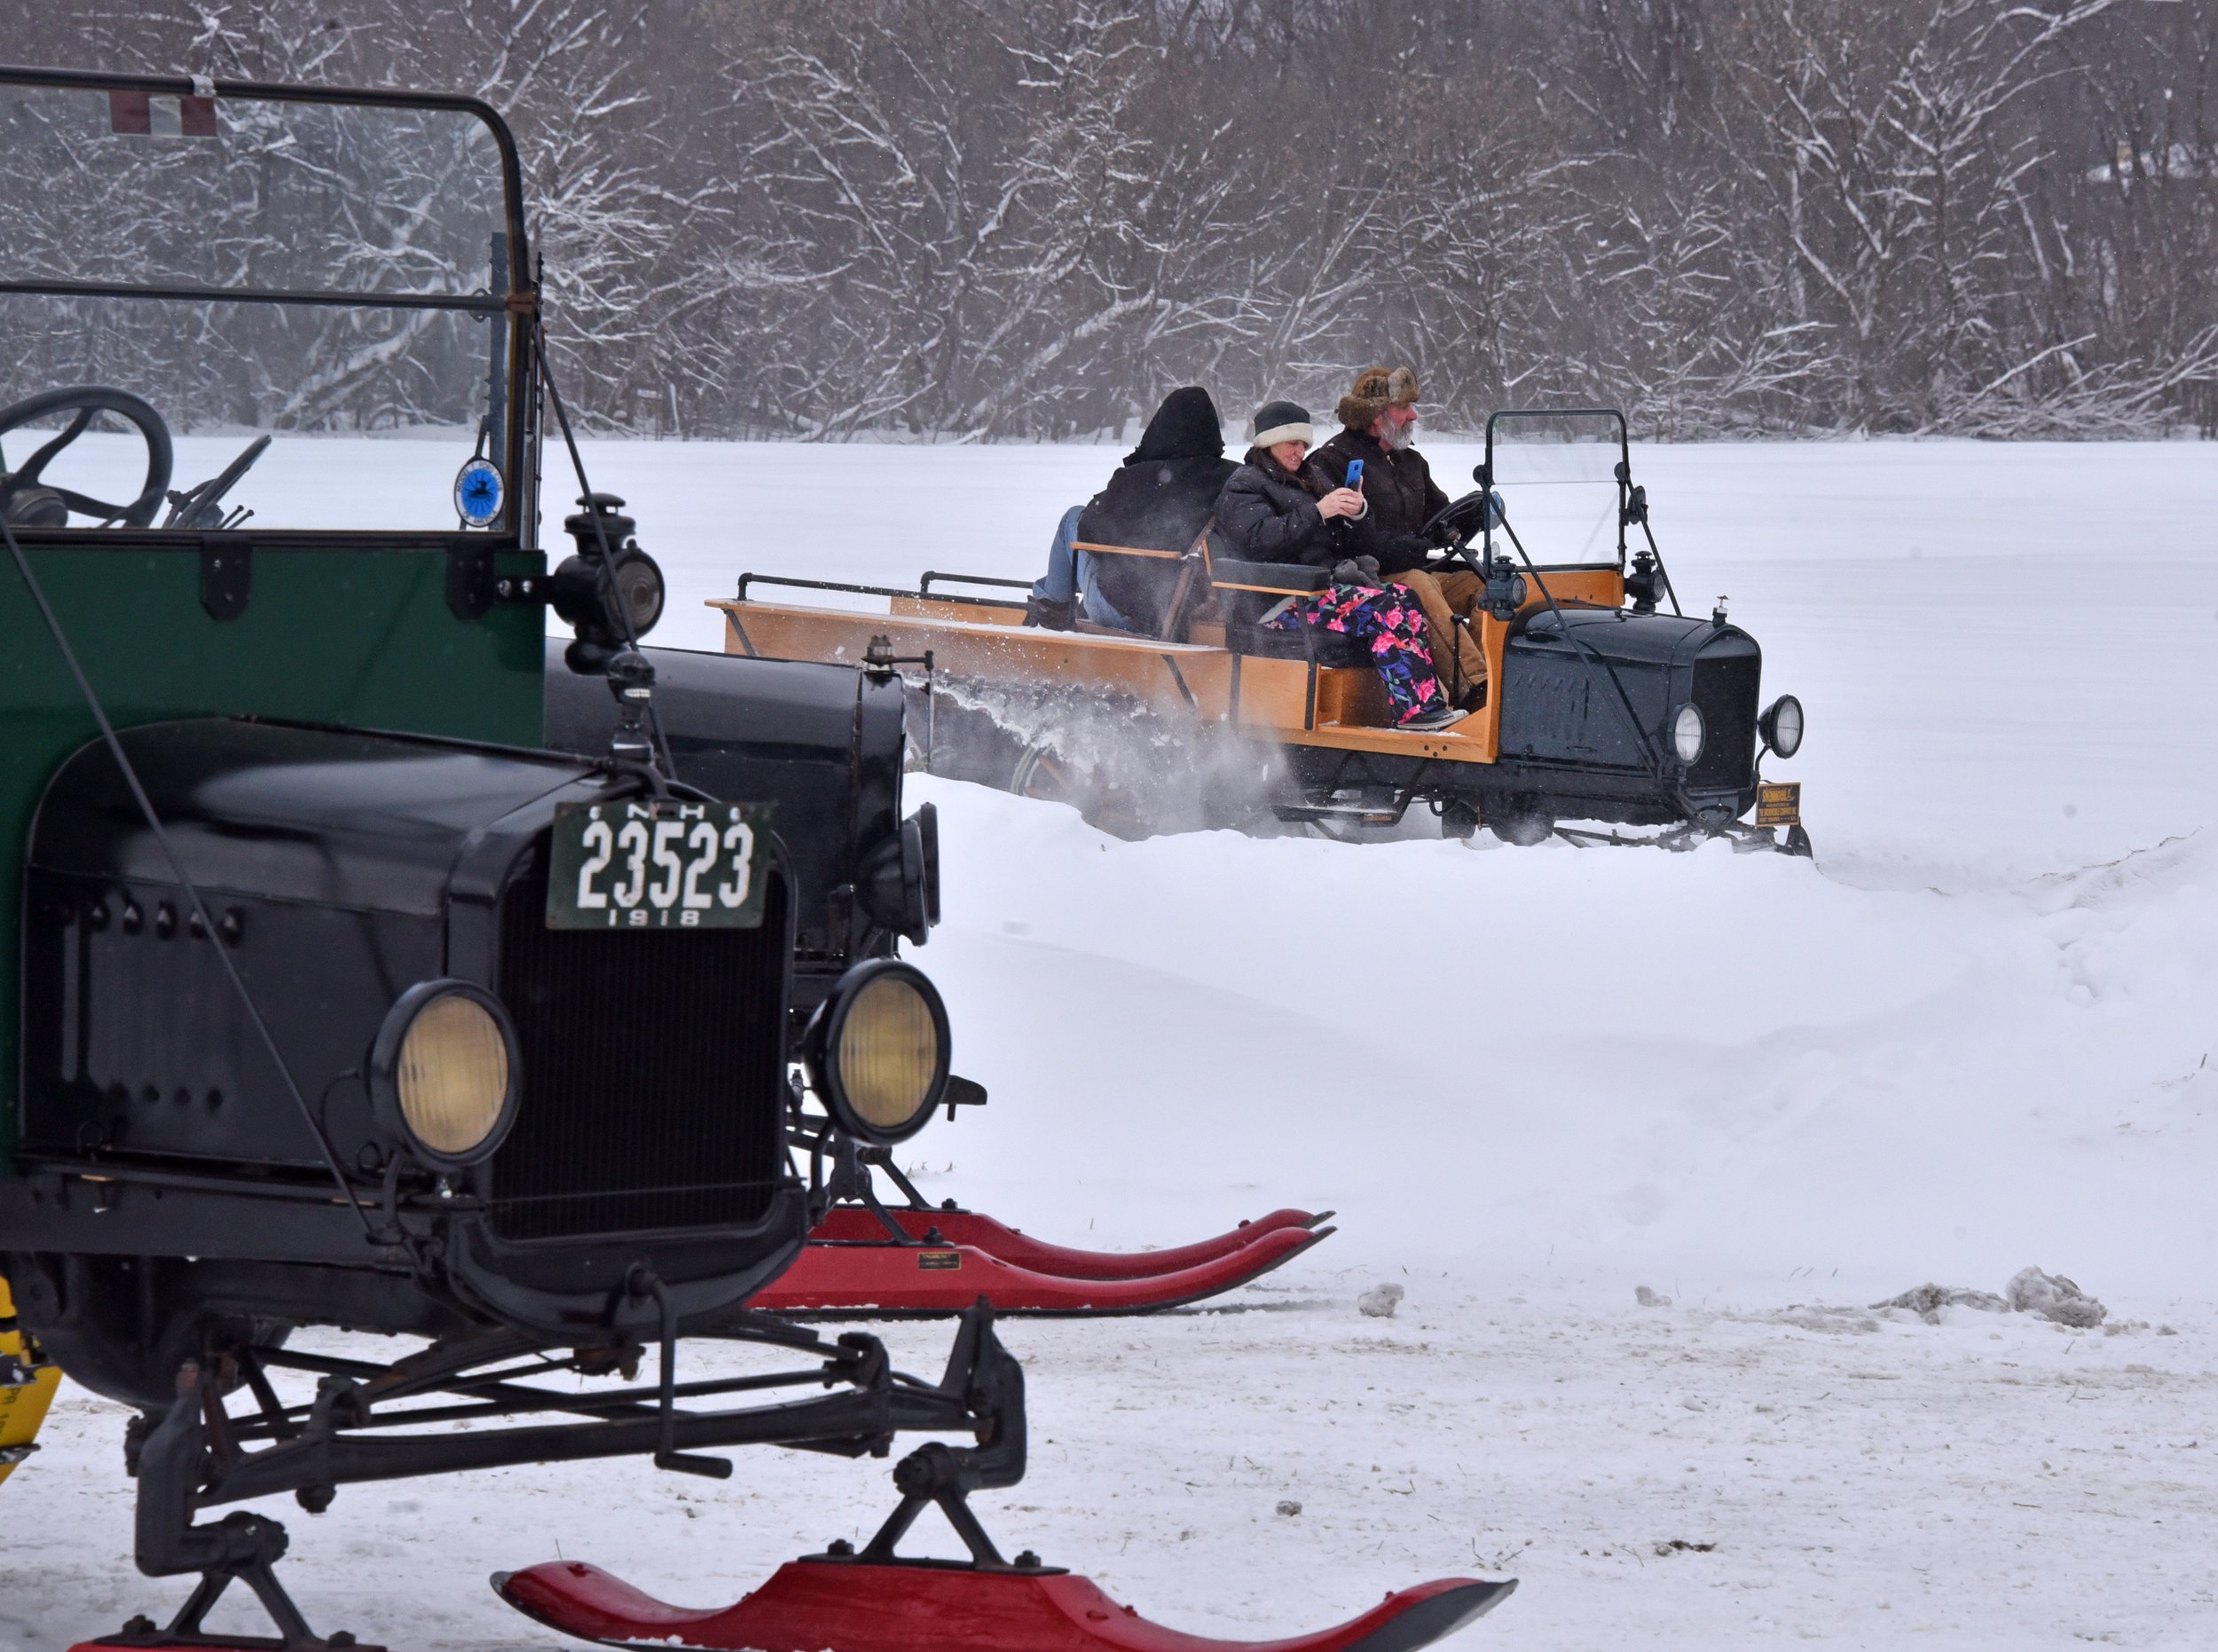   The visiting snowmobilers gave rides during the day. Photo by Gordon Miller  